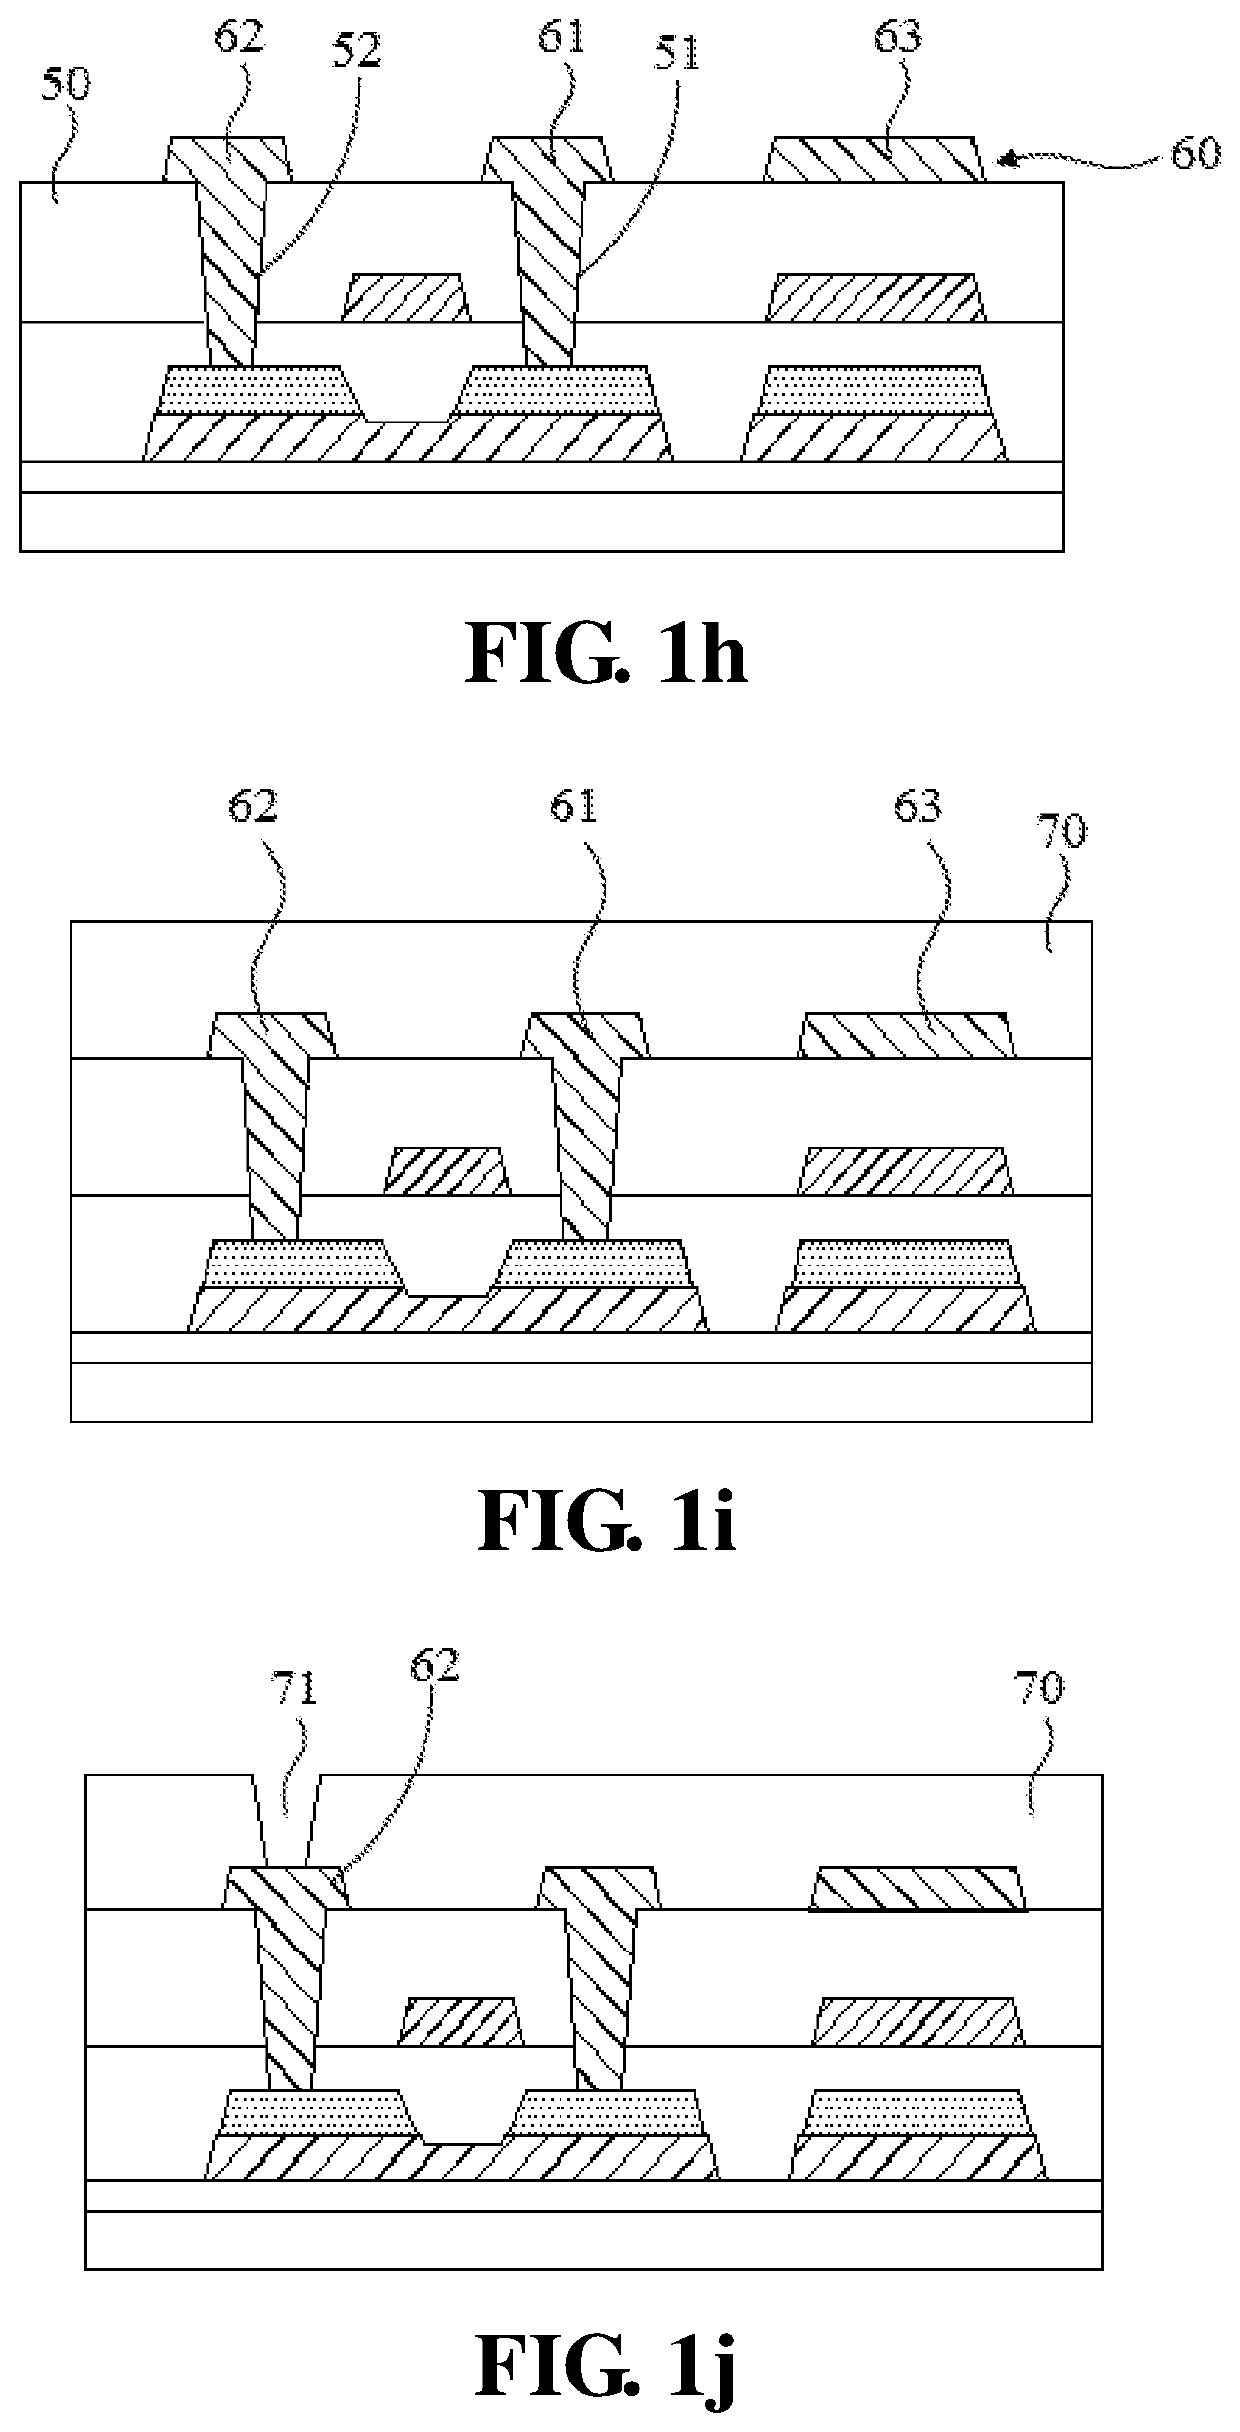 Thin film transistor array substrate, method of manufacturing the same, and display device including thin film transistor substrate